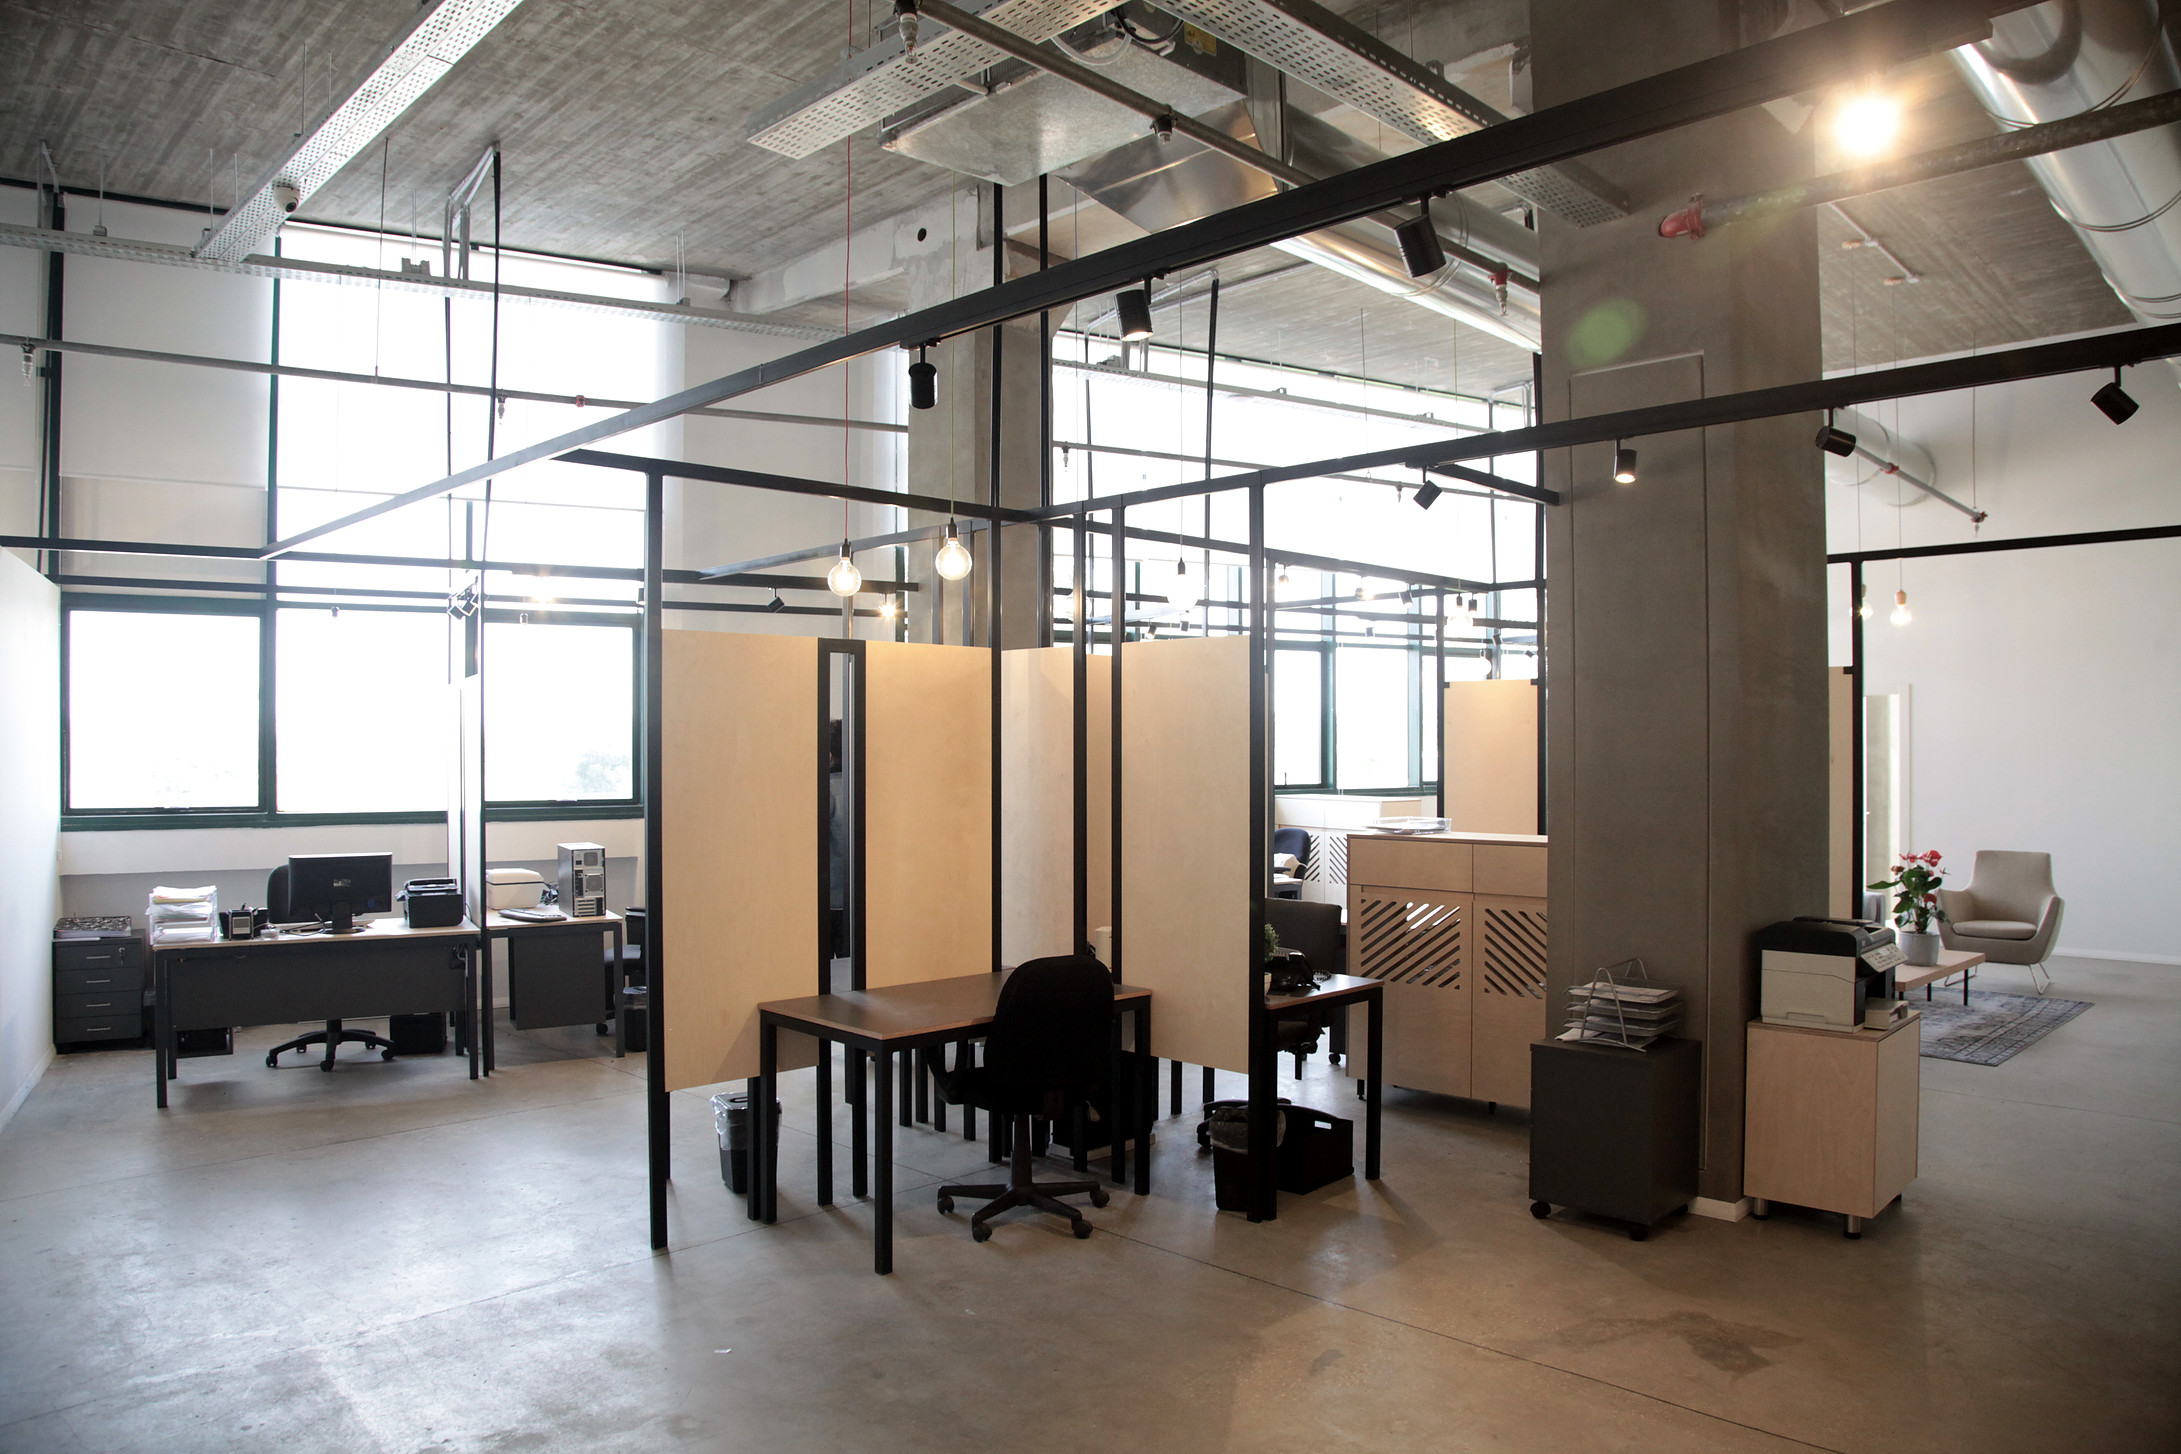 Office wood dividers and grid construction made of steel